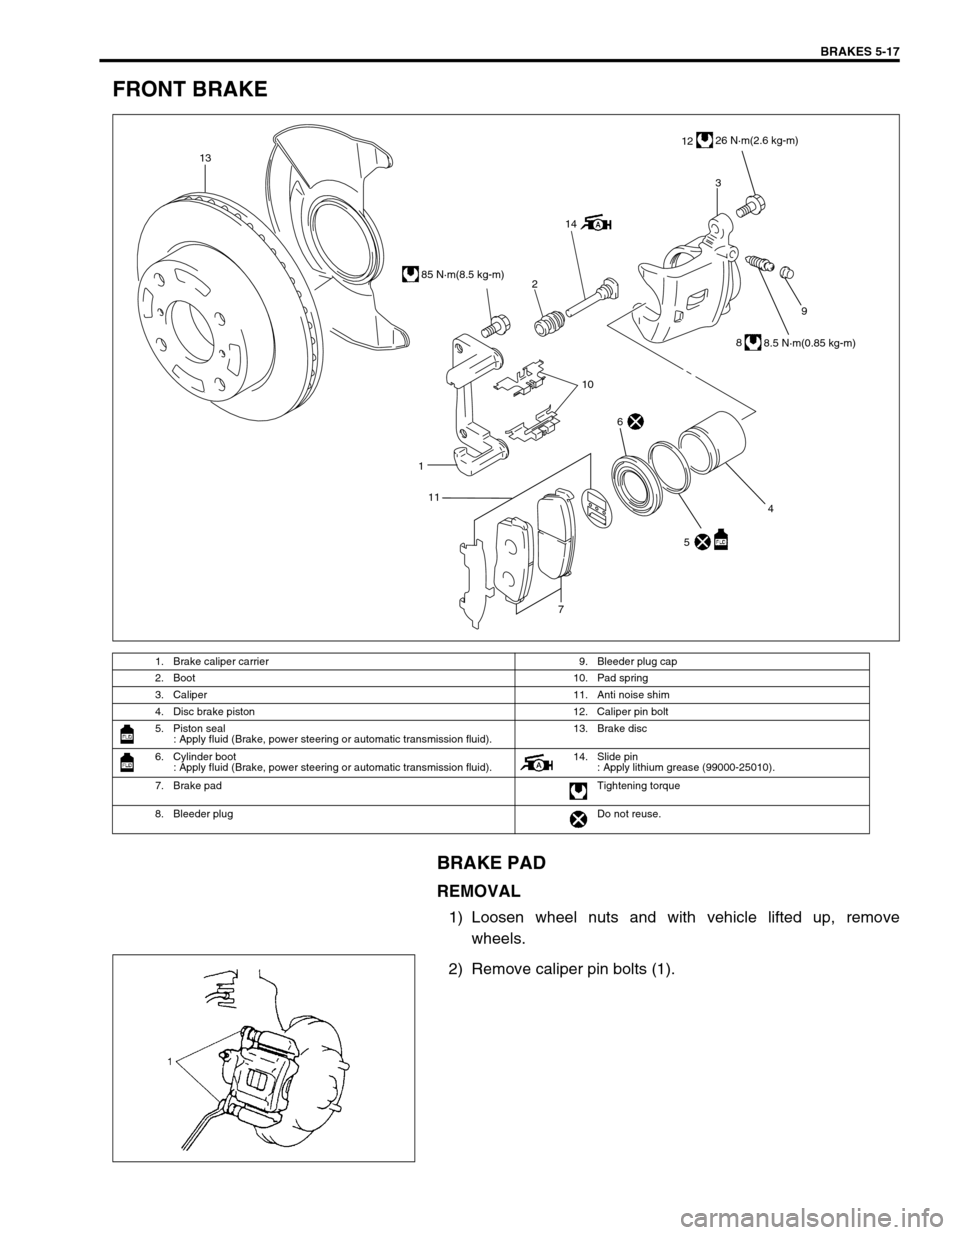 SUZUKI SWIFT 2000 1.G RG413 Service Workshop Manual BRAKES 5-17
FRONT BRAKE
BRAKE PAD
REMOVAL
1) Loosen wheel nuts and with vehicle lifted up, remove
wheels.
2) Remove caliper pin bolts (1).
1. Brake caliper carrier  9. Bleeder plug cap
2. Boot 10. Pad